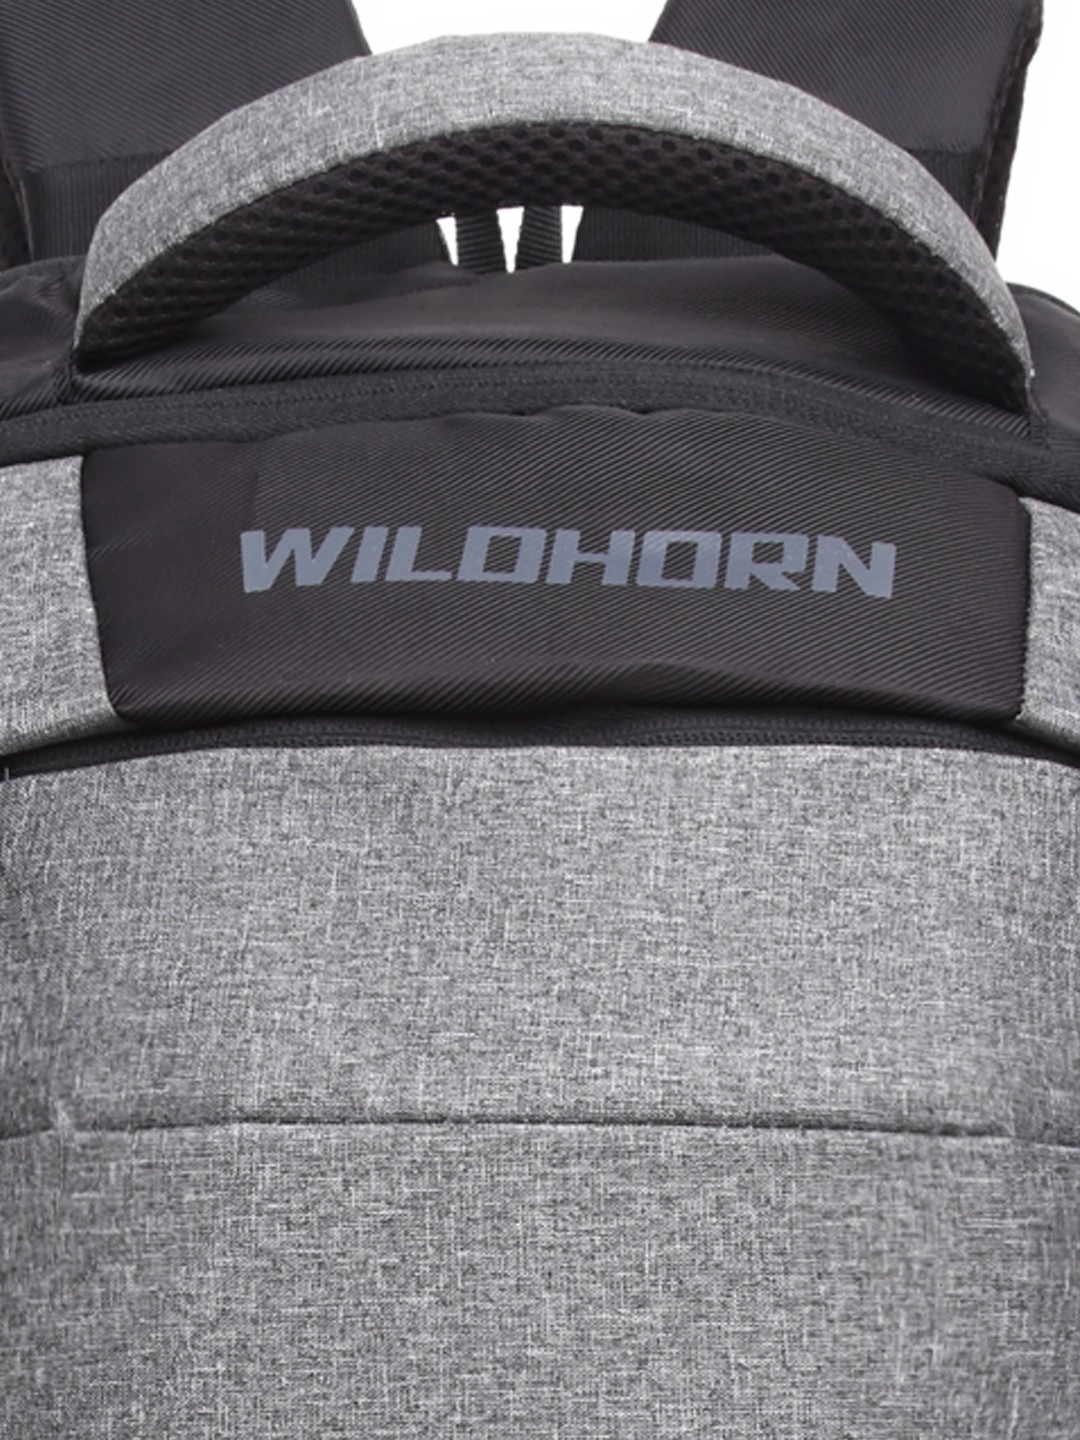 WildHorn | WILDHORN Laptop Backpack for Men & Women, Extra Large 30L Travel Backpack with Multi Zip Compartment, Business College Bookbag Fit 17 Inch Laptop 5